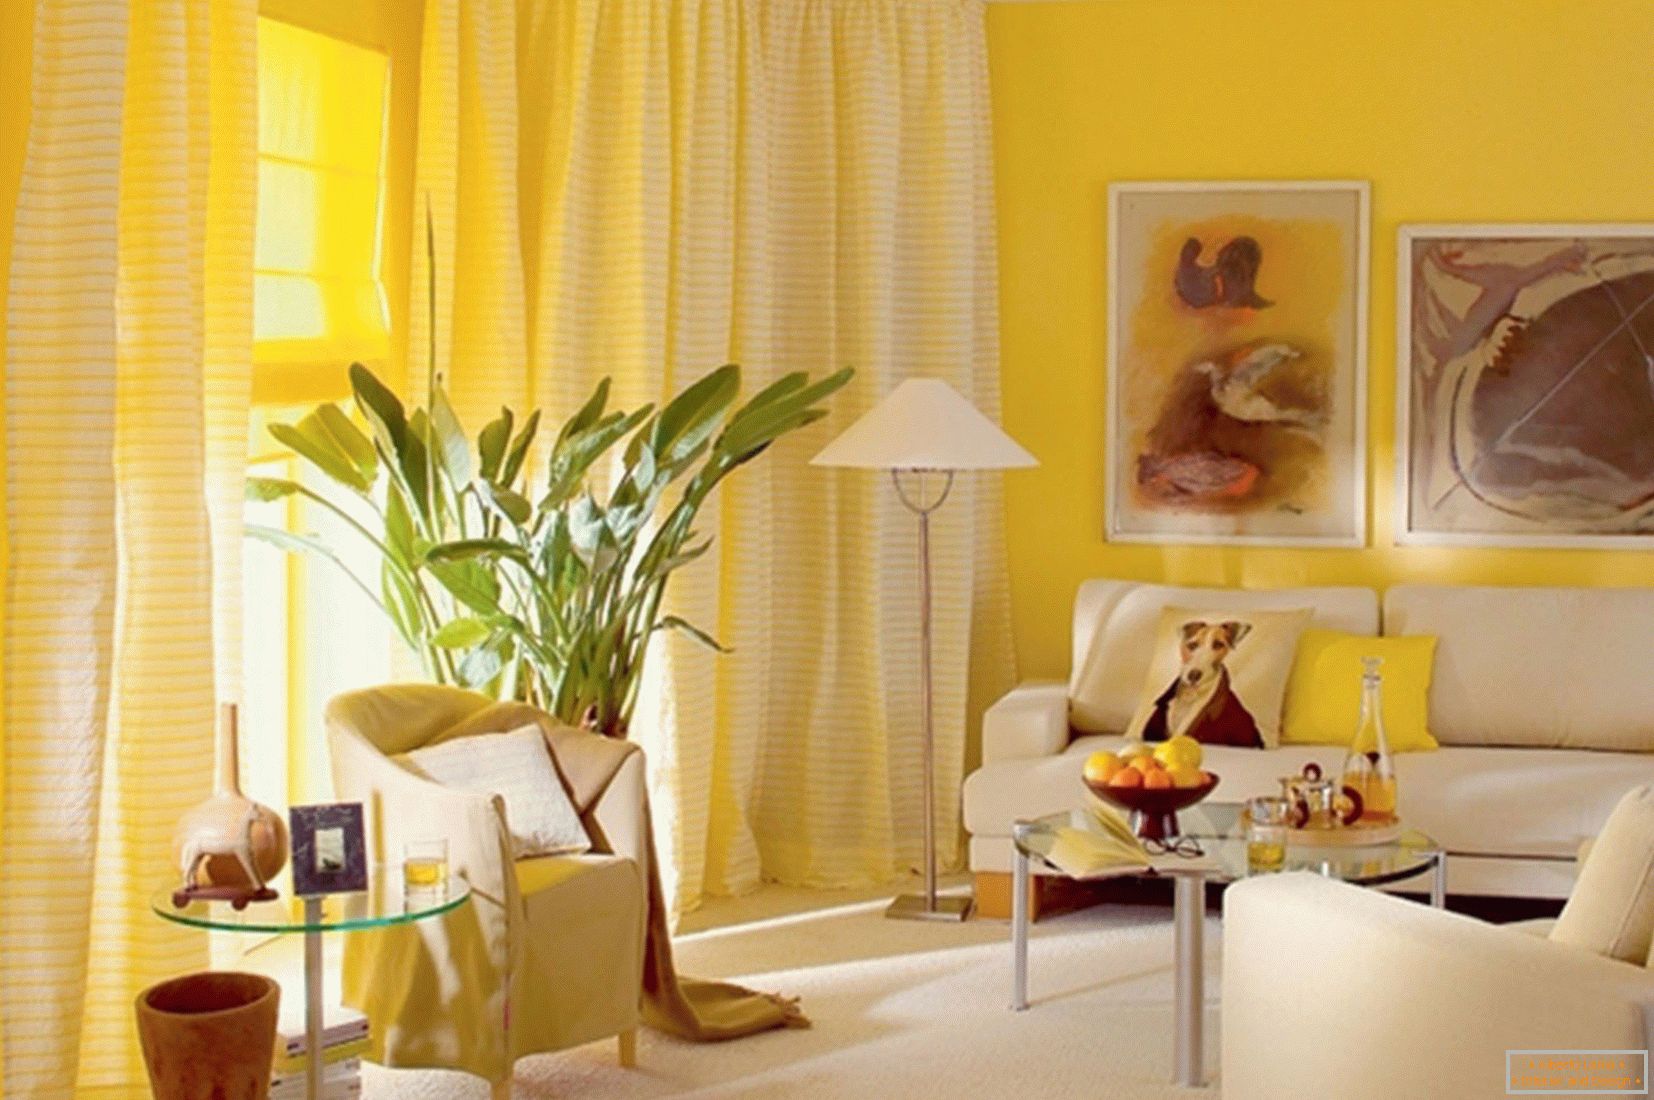 The solar living room is yellow